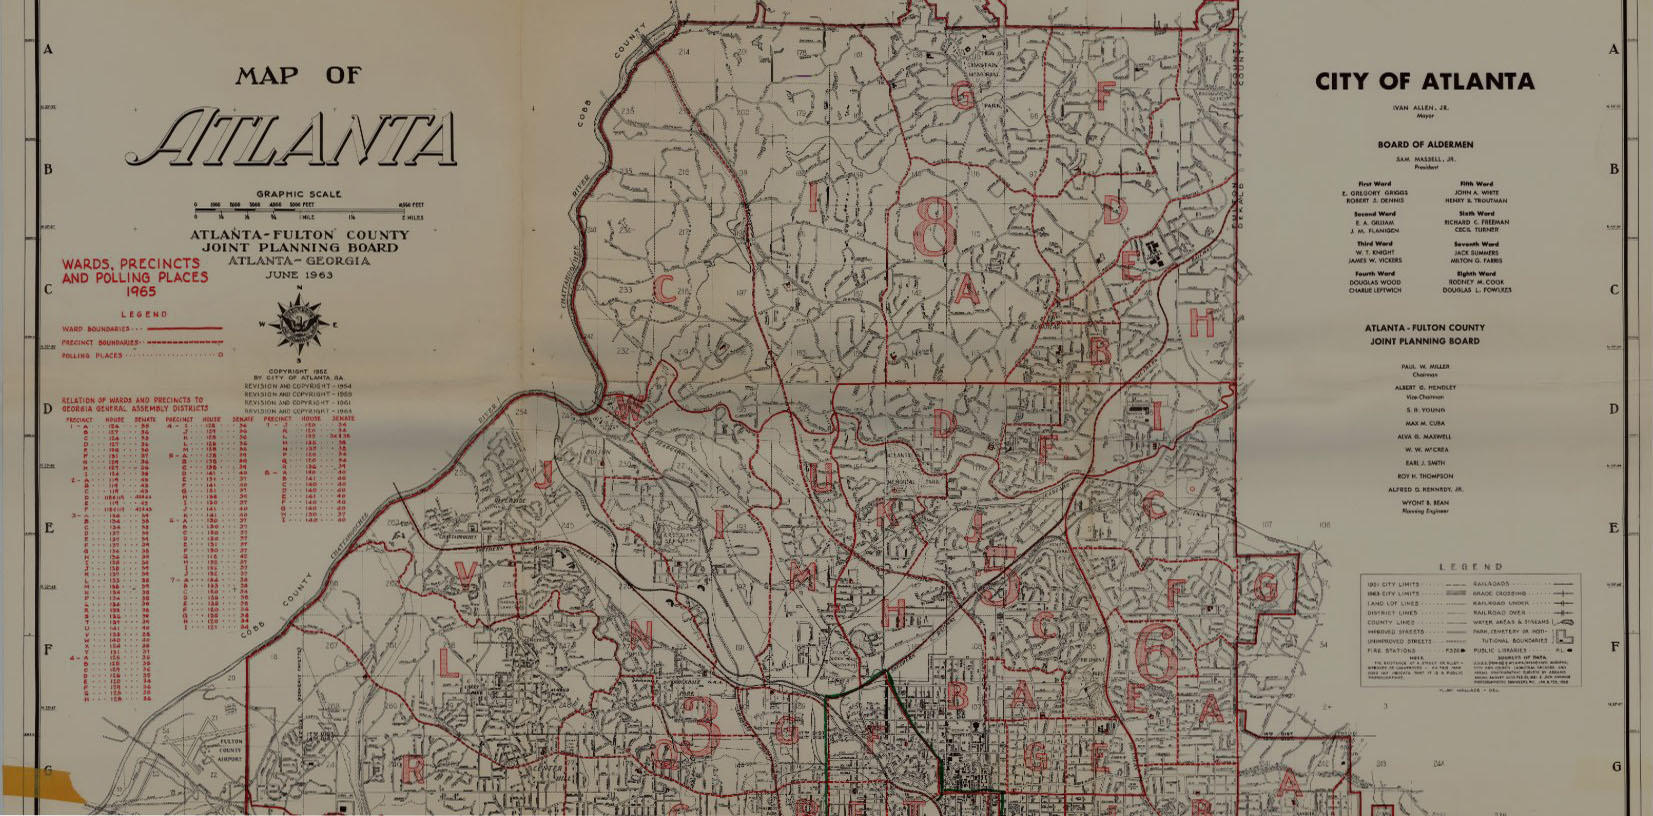 Grace Towns Hamilton (1907-1992) was a civic leader and Georgia General Assembly member. She is known as the first African American woman elected to the Georgia General Assembly. She represented the Vine City area of Atlanta in the Georgia House of Representatives from 1965 to 1984. Maps in the collection span from 1960 to 1981 with the bulk of the material from 1963 to 1975. They consist of Atlanta Neighborhoods, Atlanta Congressional Districts, Georgia counties, and election precincts of Fulton County, GA. Images in the collection span from 1910 to 1984 with the majority of materials from 1910 to 1930. They consist of Hamilton’s family, childhood, and individual portraits.

At the AUC Robert W. Woodruff Library we are always striving to improve our digital collections. We welcome additional information about people, places, or events depicted in any of the works in this collection. To submit information, please contact us at DSD@auctr.edu. 